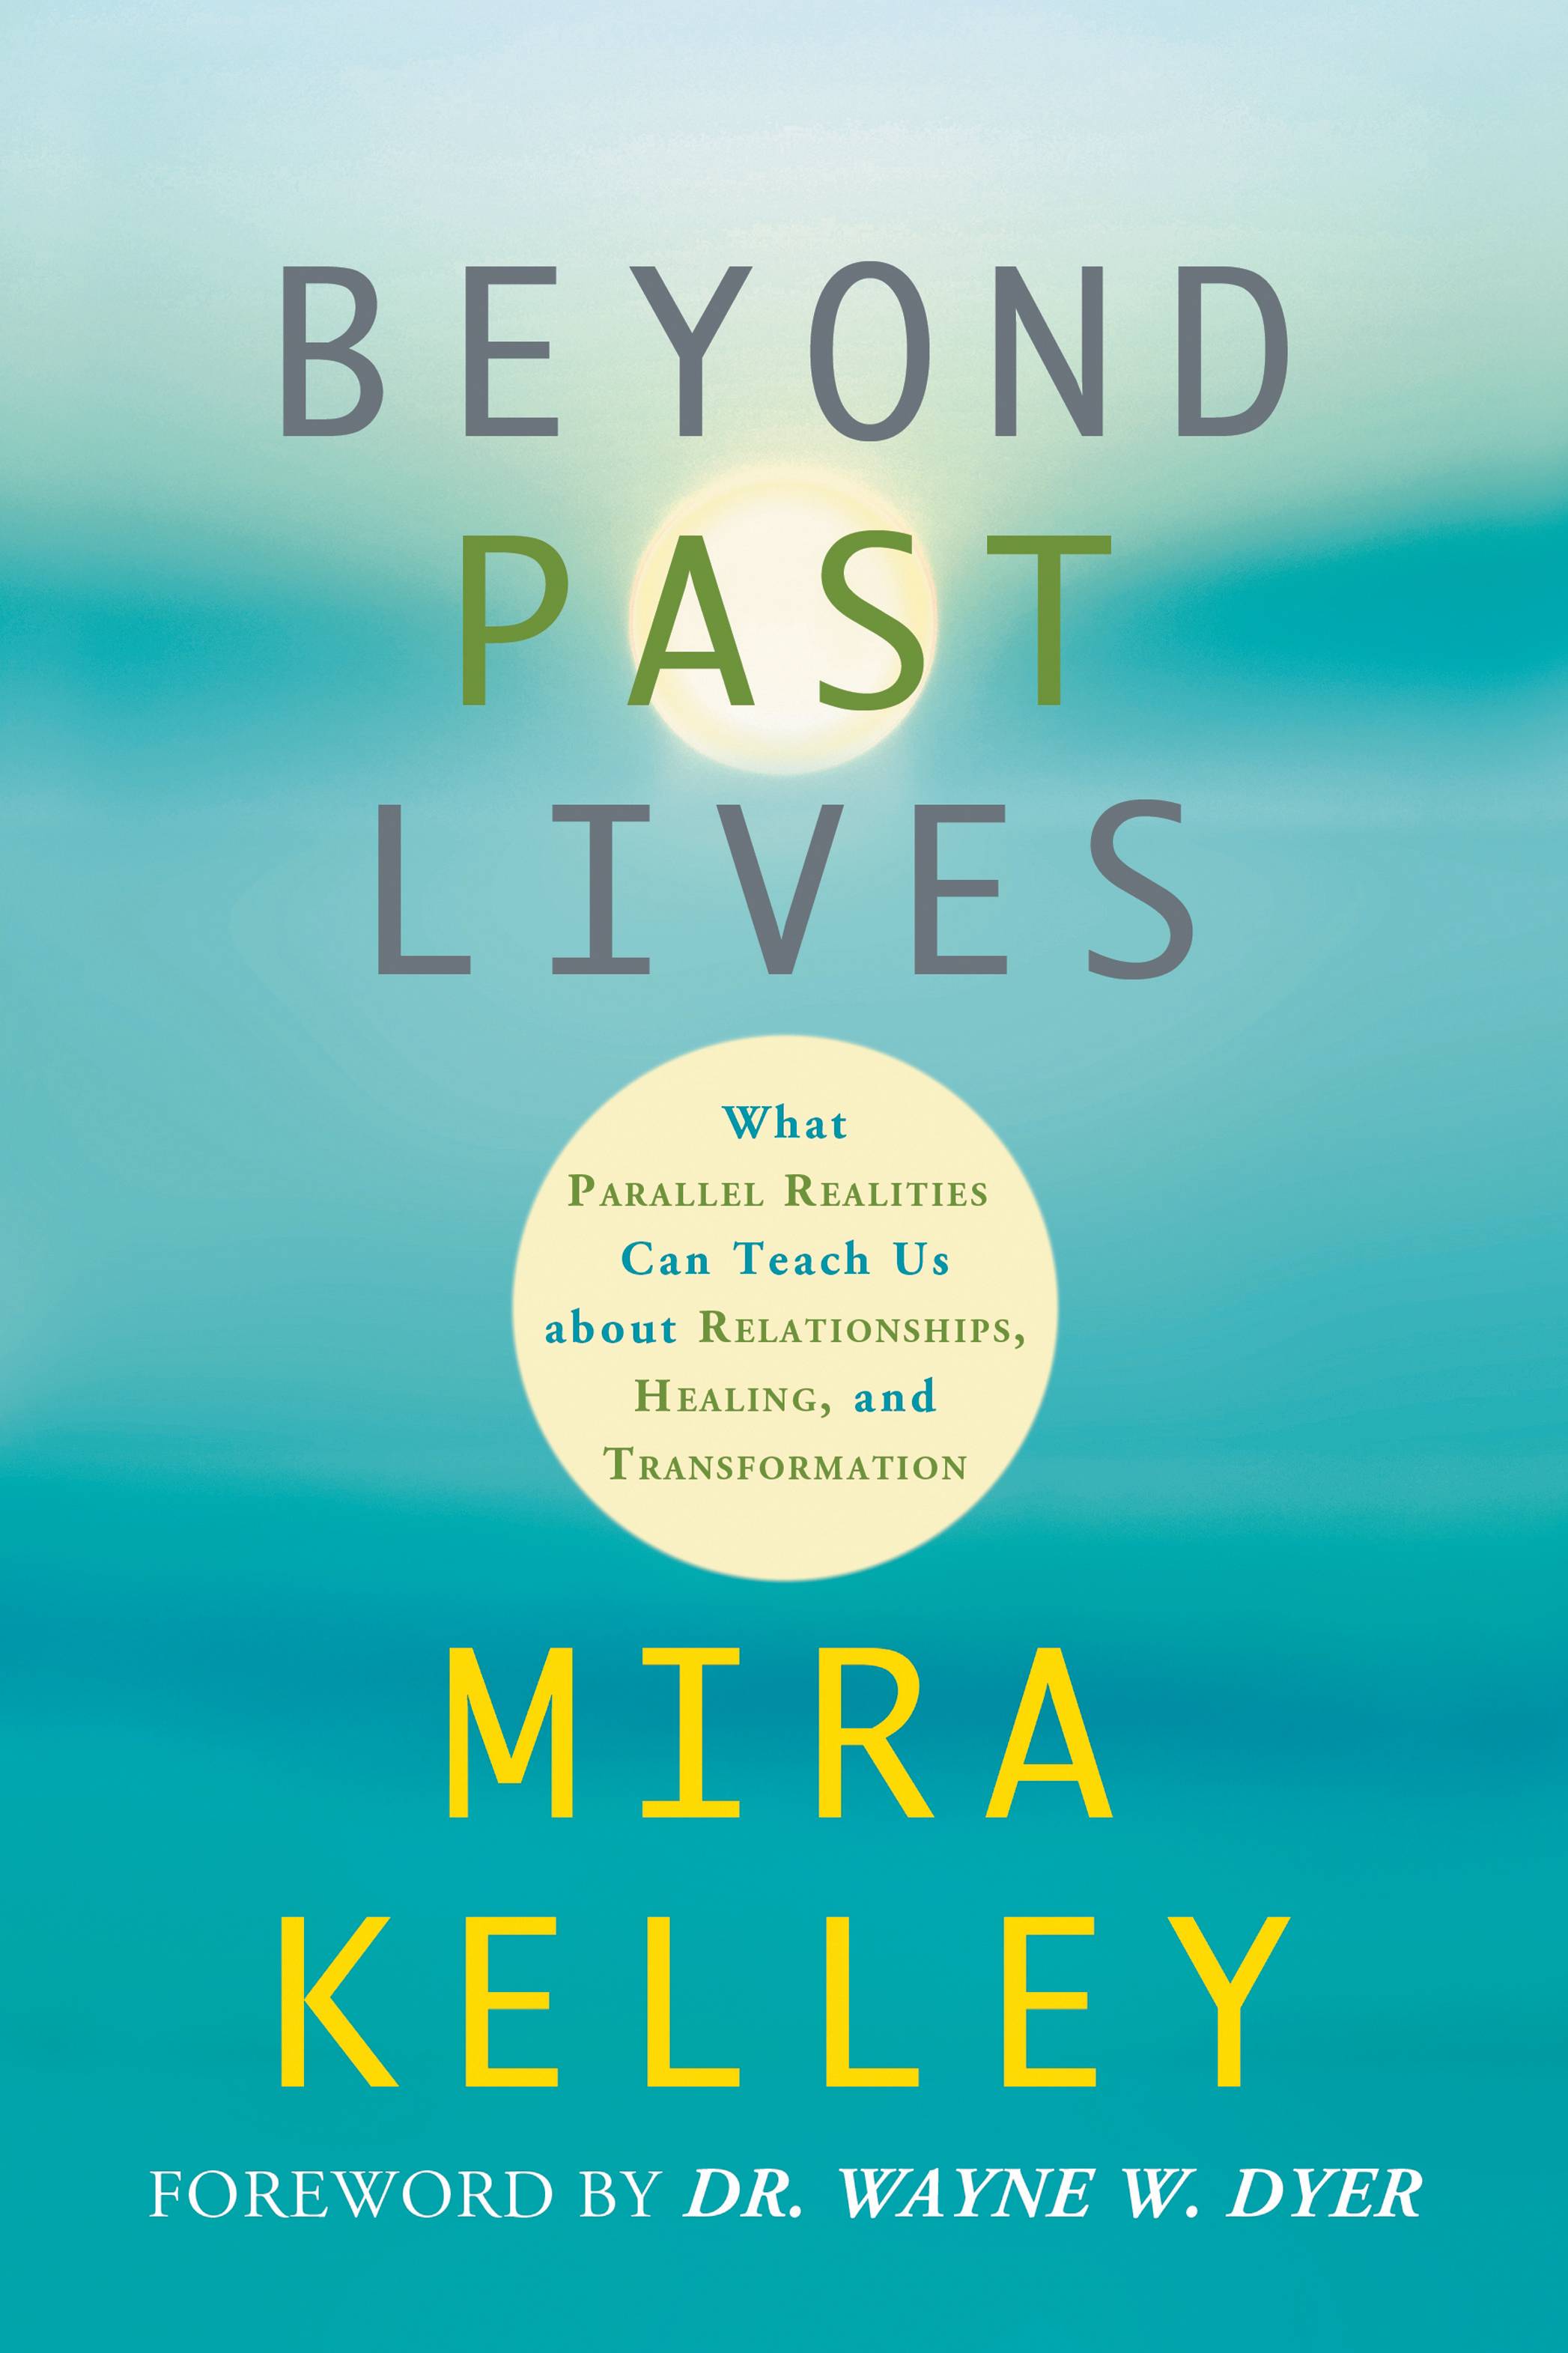 Beyond past lives - what parallel realities can teach us about relationship